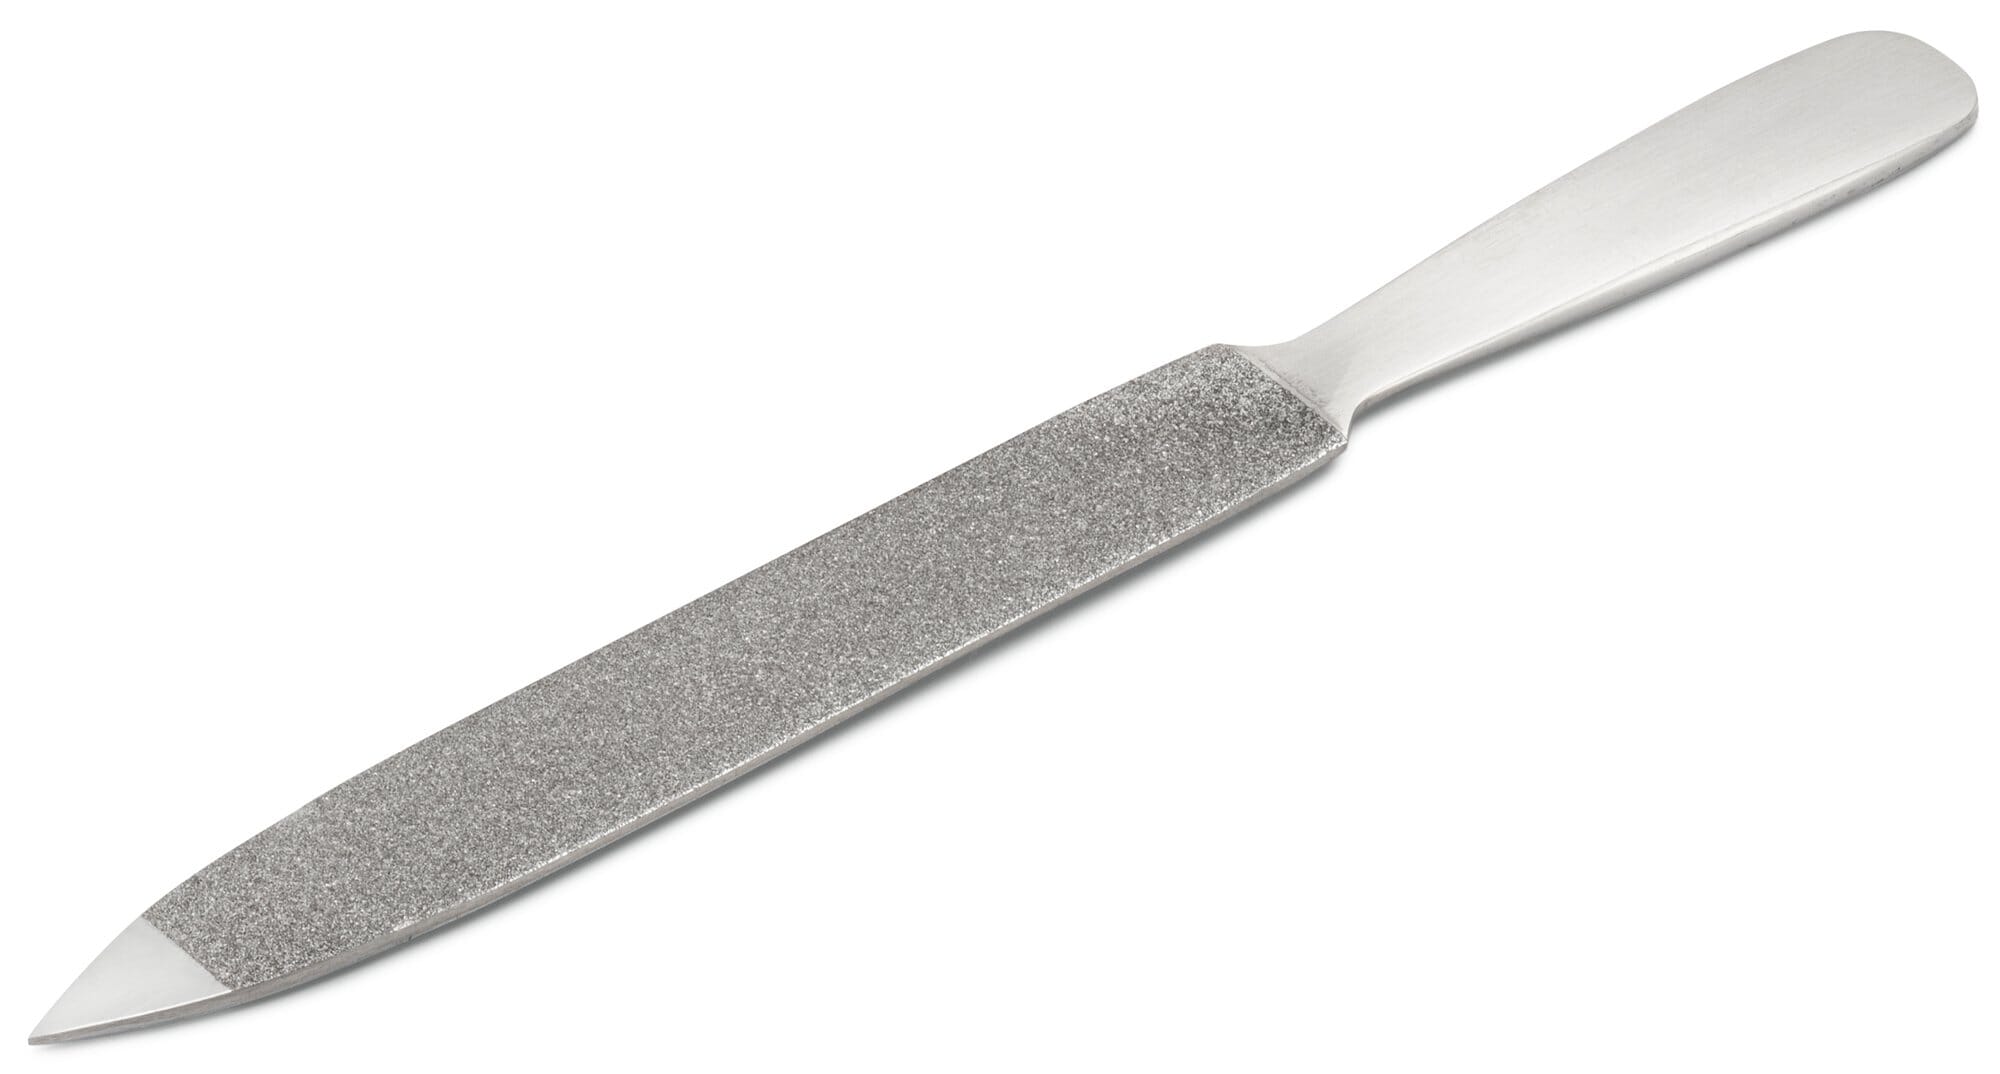 Sapphire nail file stainless steel | Manufactum